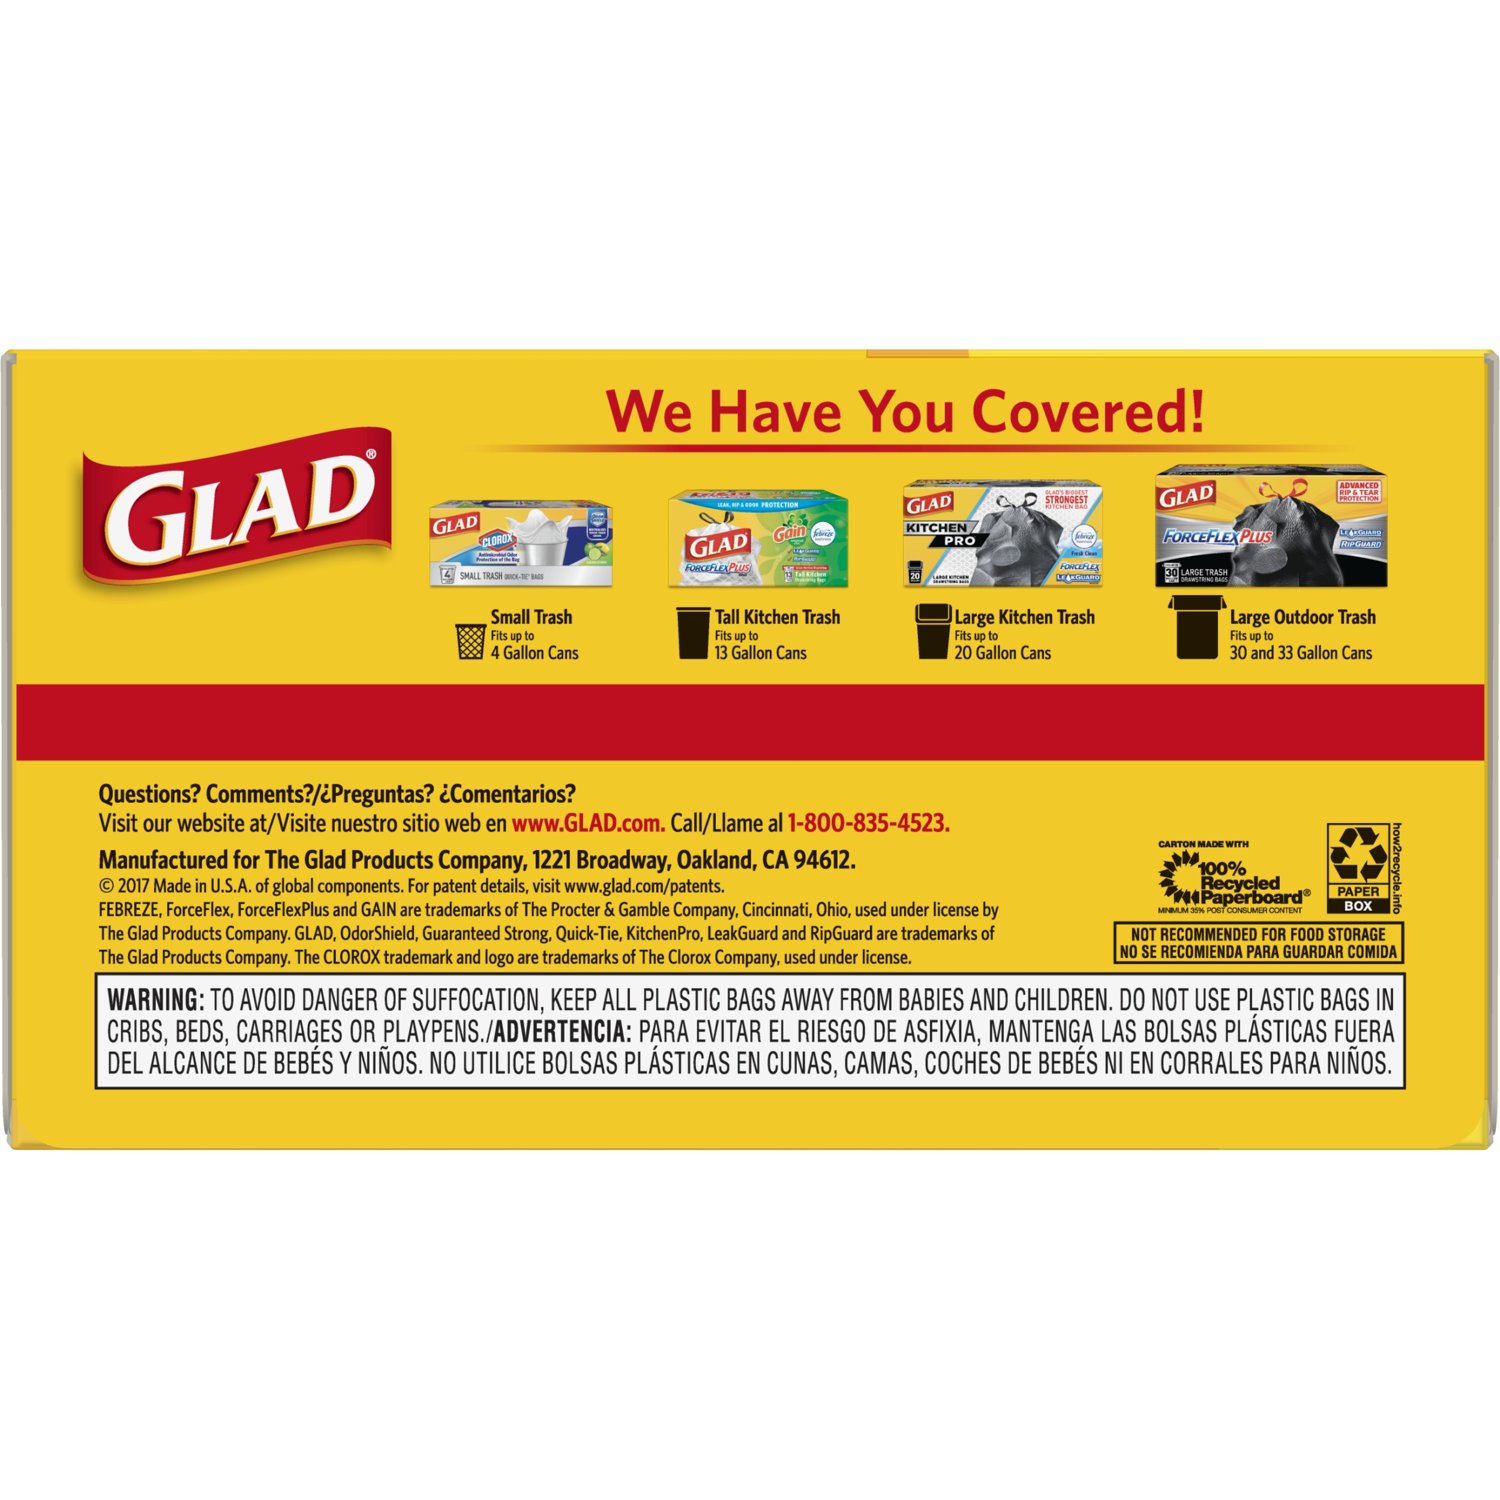 Glad Quick Tie 13 Gallon Tall Kitchen Trash Bags, 80 Bags - image 4 of 7